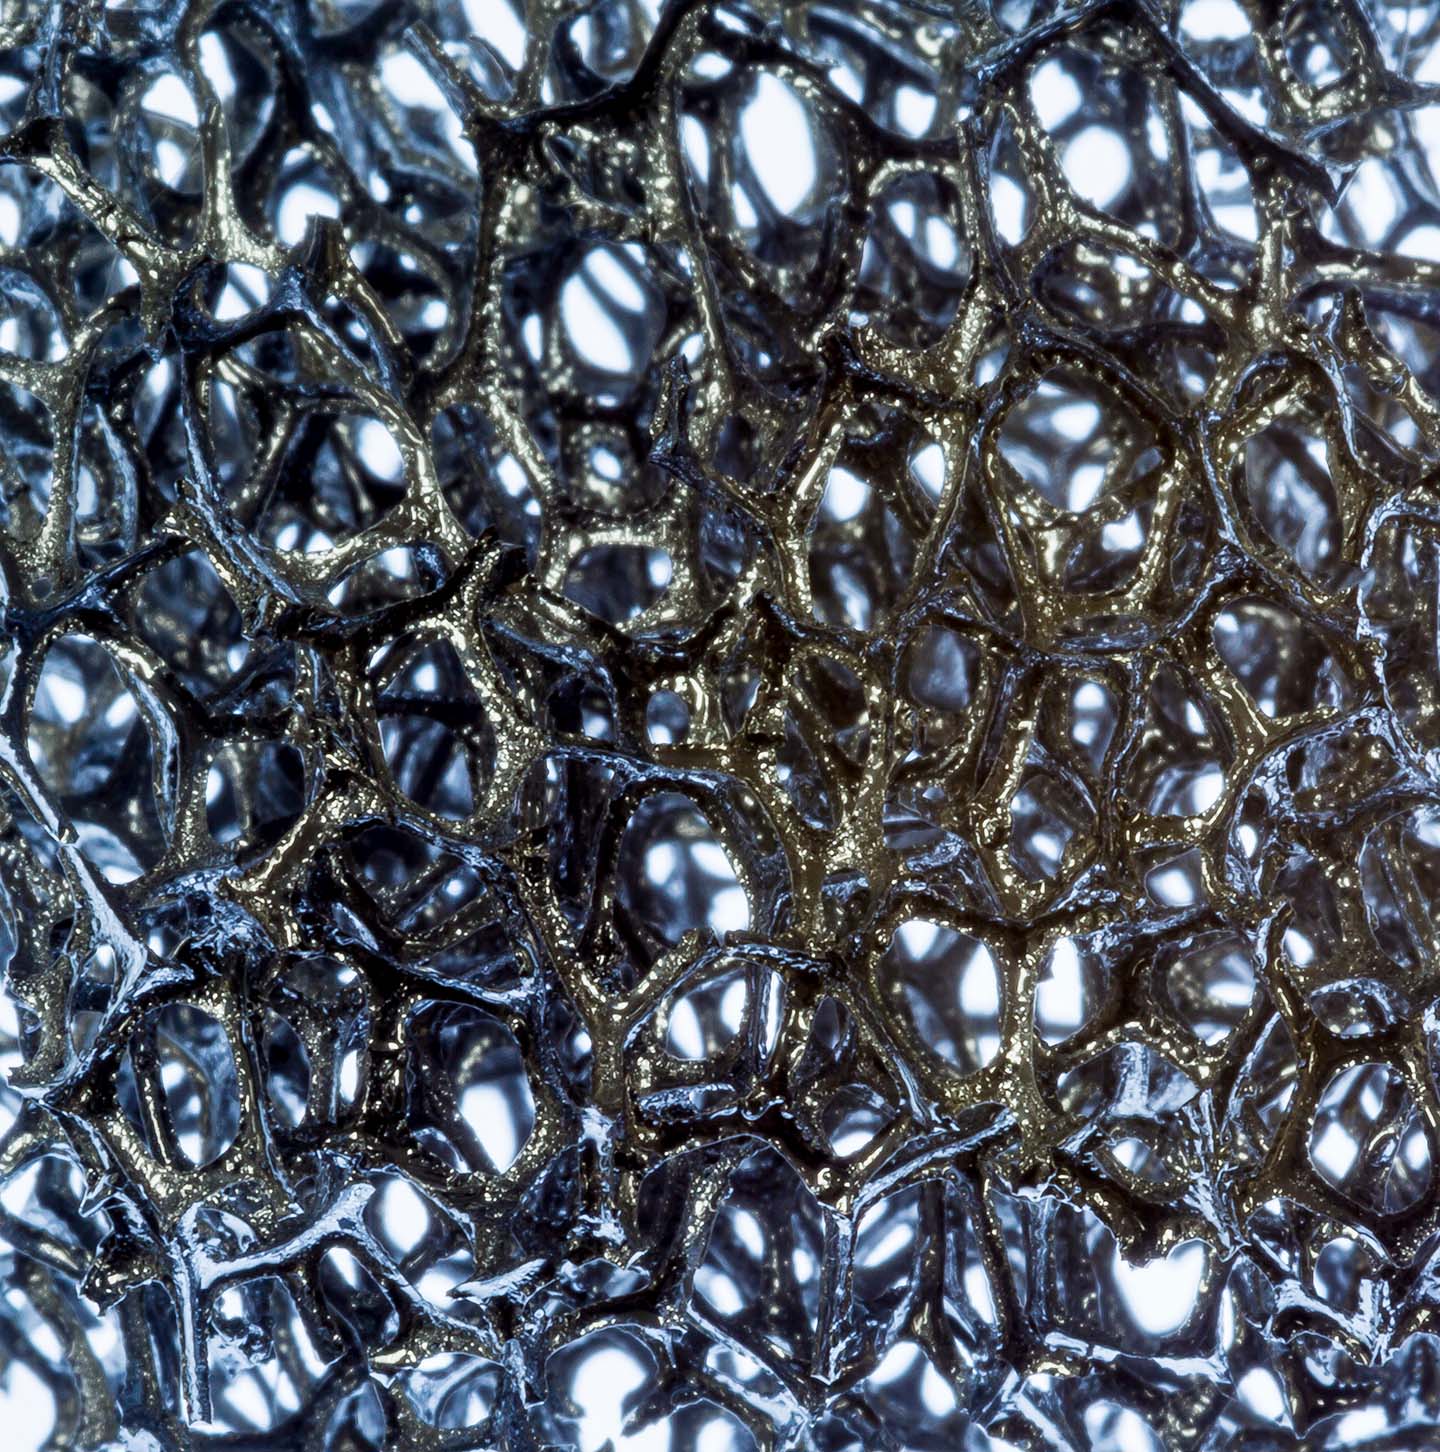 Close-up image of the boron carbide coated reticulated carbon foam sample used in the experiments